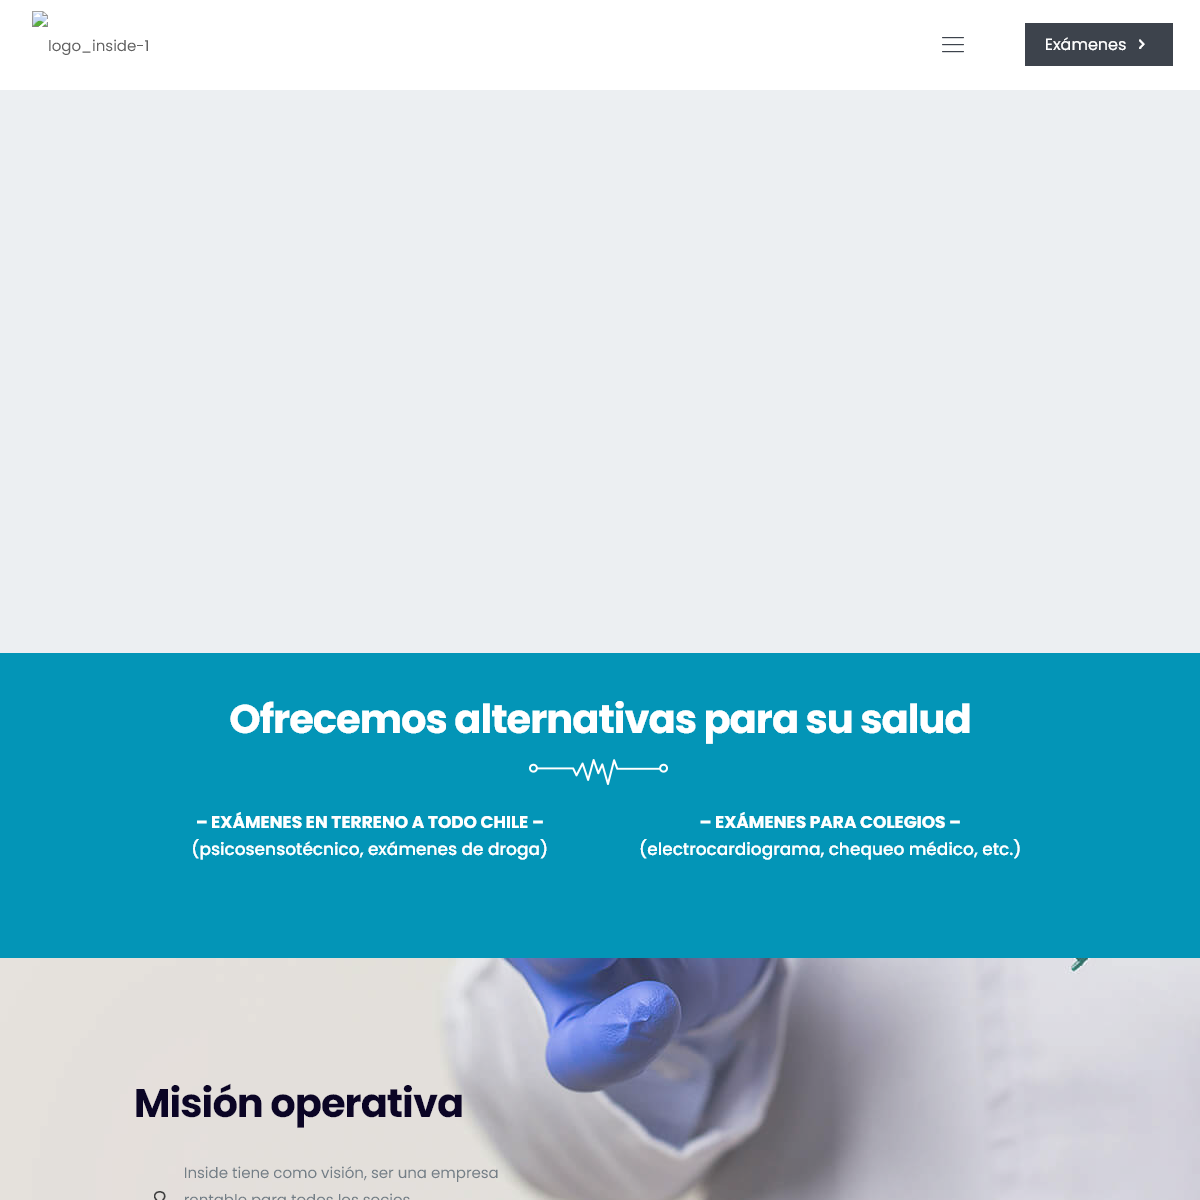 A complete backup of insidesalud.cl